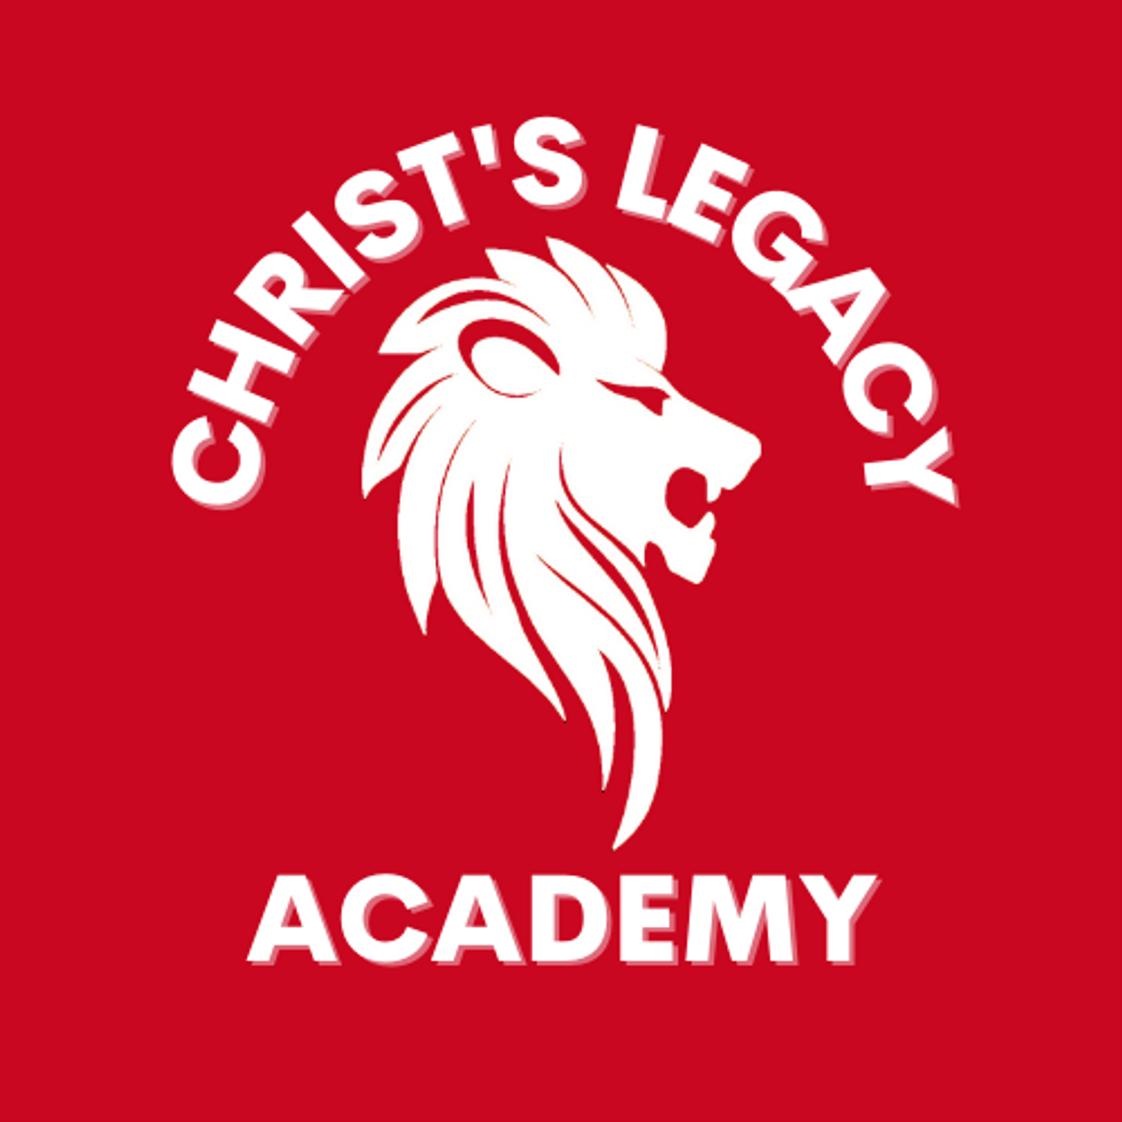 Christ's Legacy Academy Photo #1 - Mission Statement: We partner with families to classically educate students to think, live, and engage the world in a manner that consistently brings glory to God.